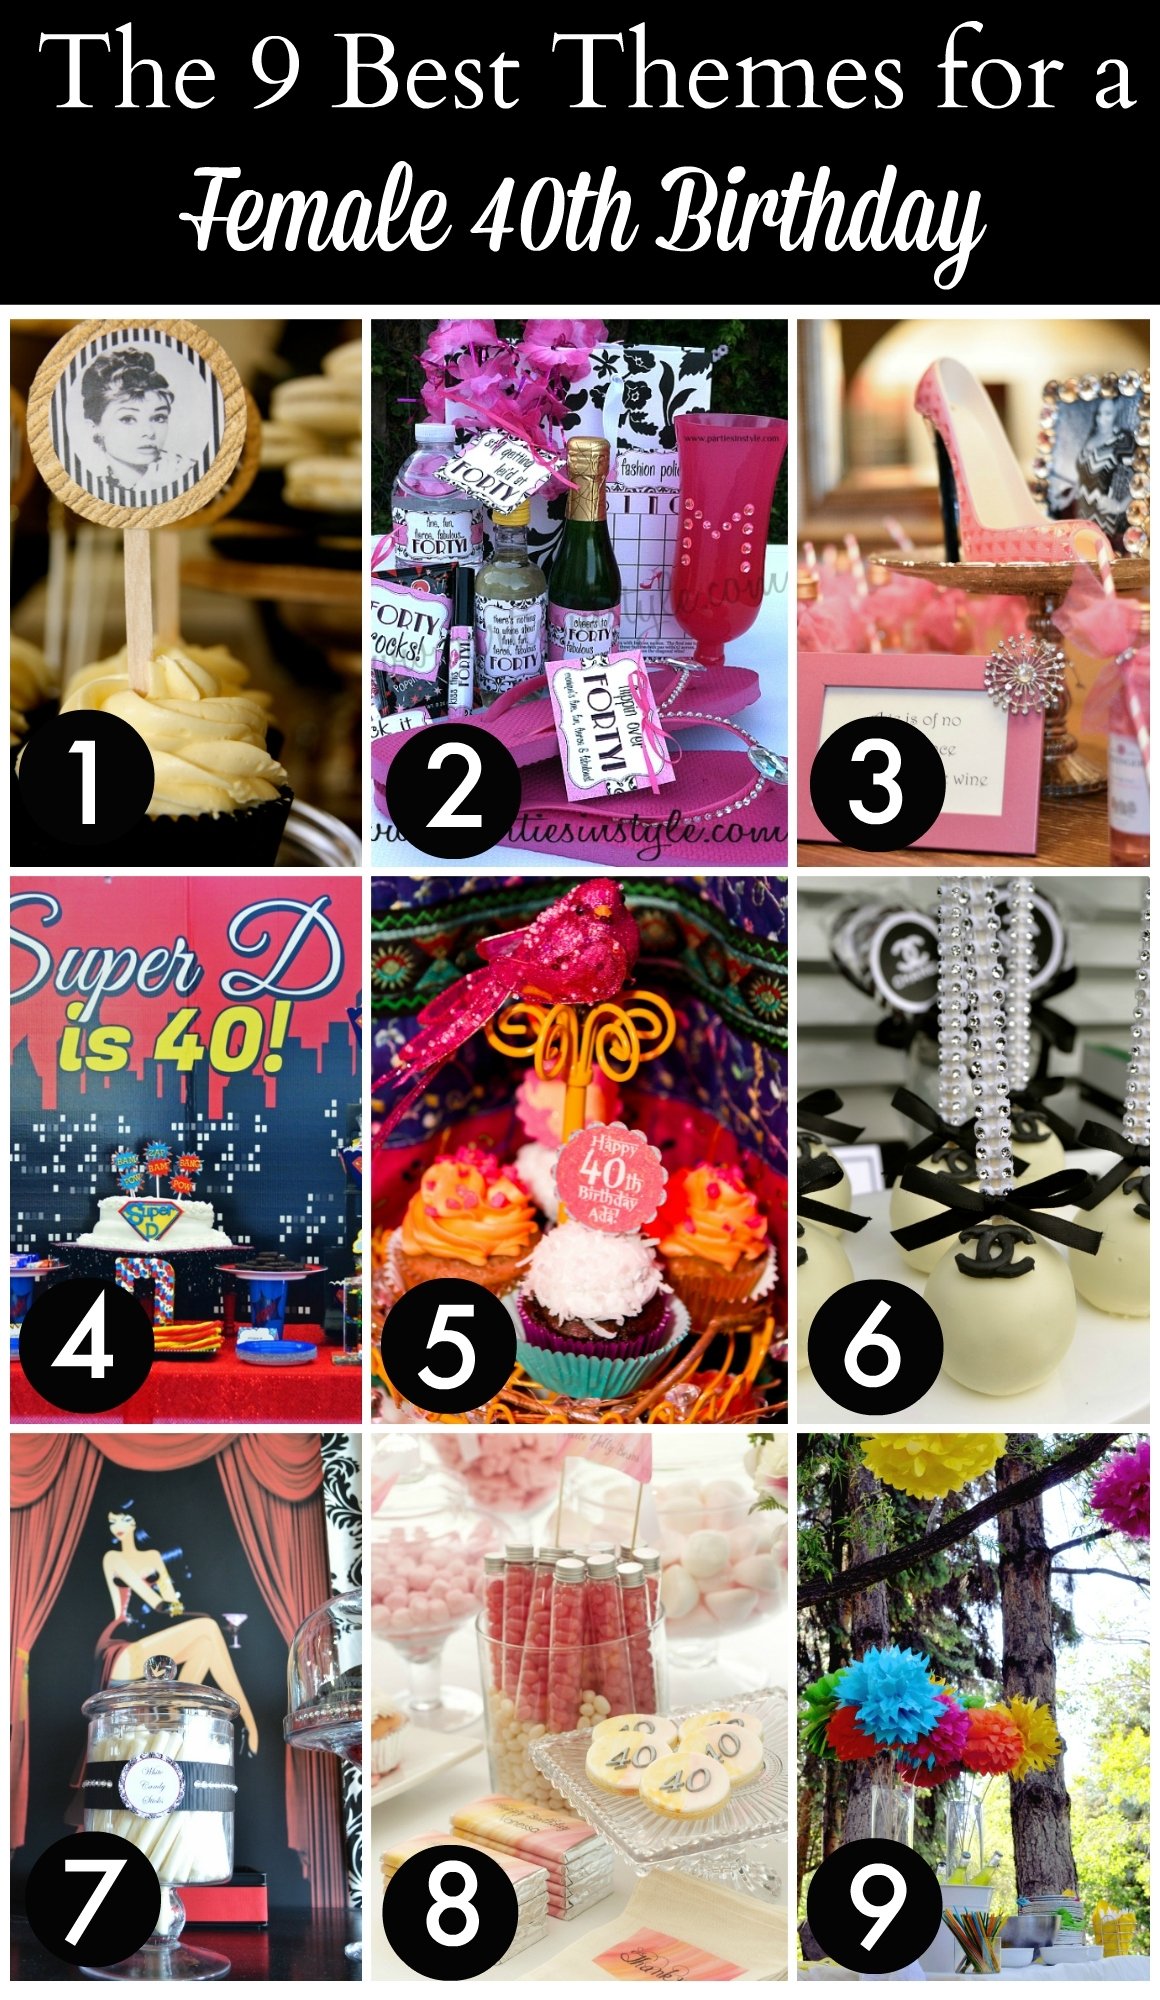 10 Amazing Gift Ideas For 40Th Birthday Female the 12 best 40th birthday themes for women catch my party 10 2022